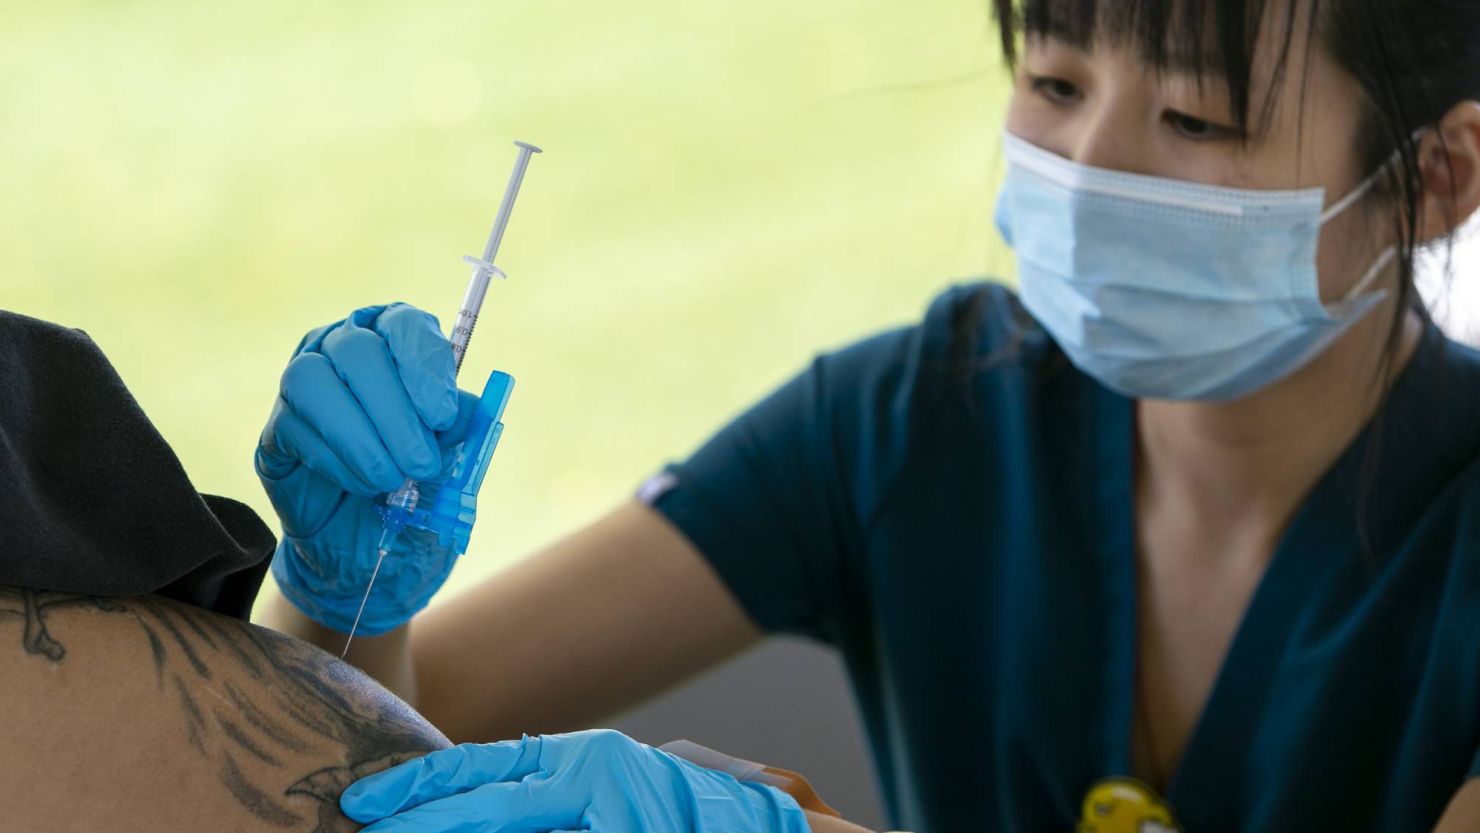 Xinna Chen administers the Moderna Covid-19 vaccine to a patient at the Human Services Campus in Phoenix on April 13, 2021.